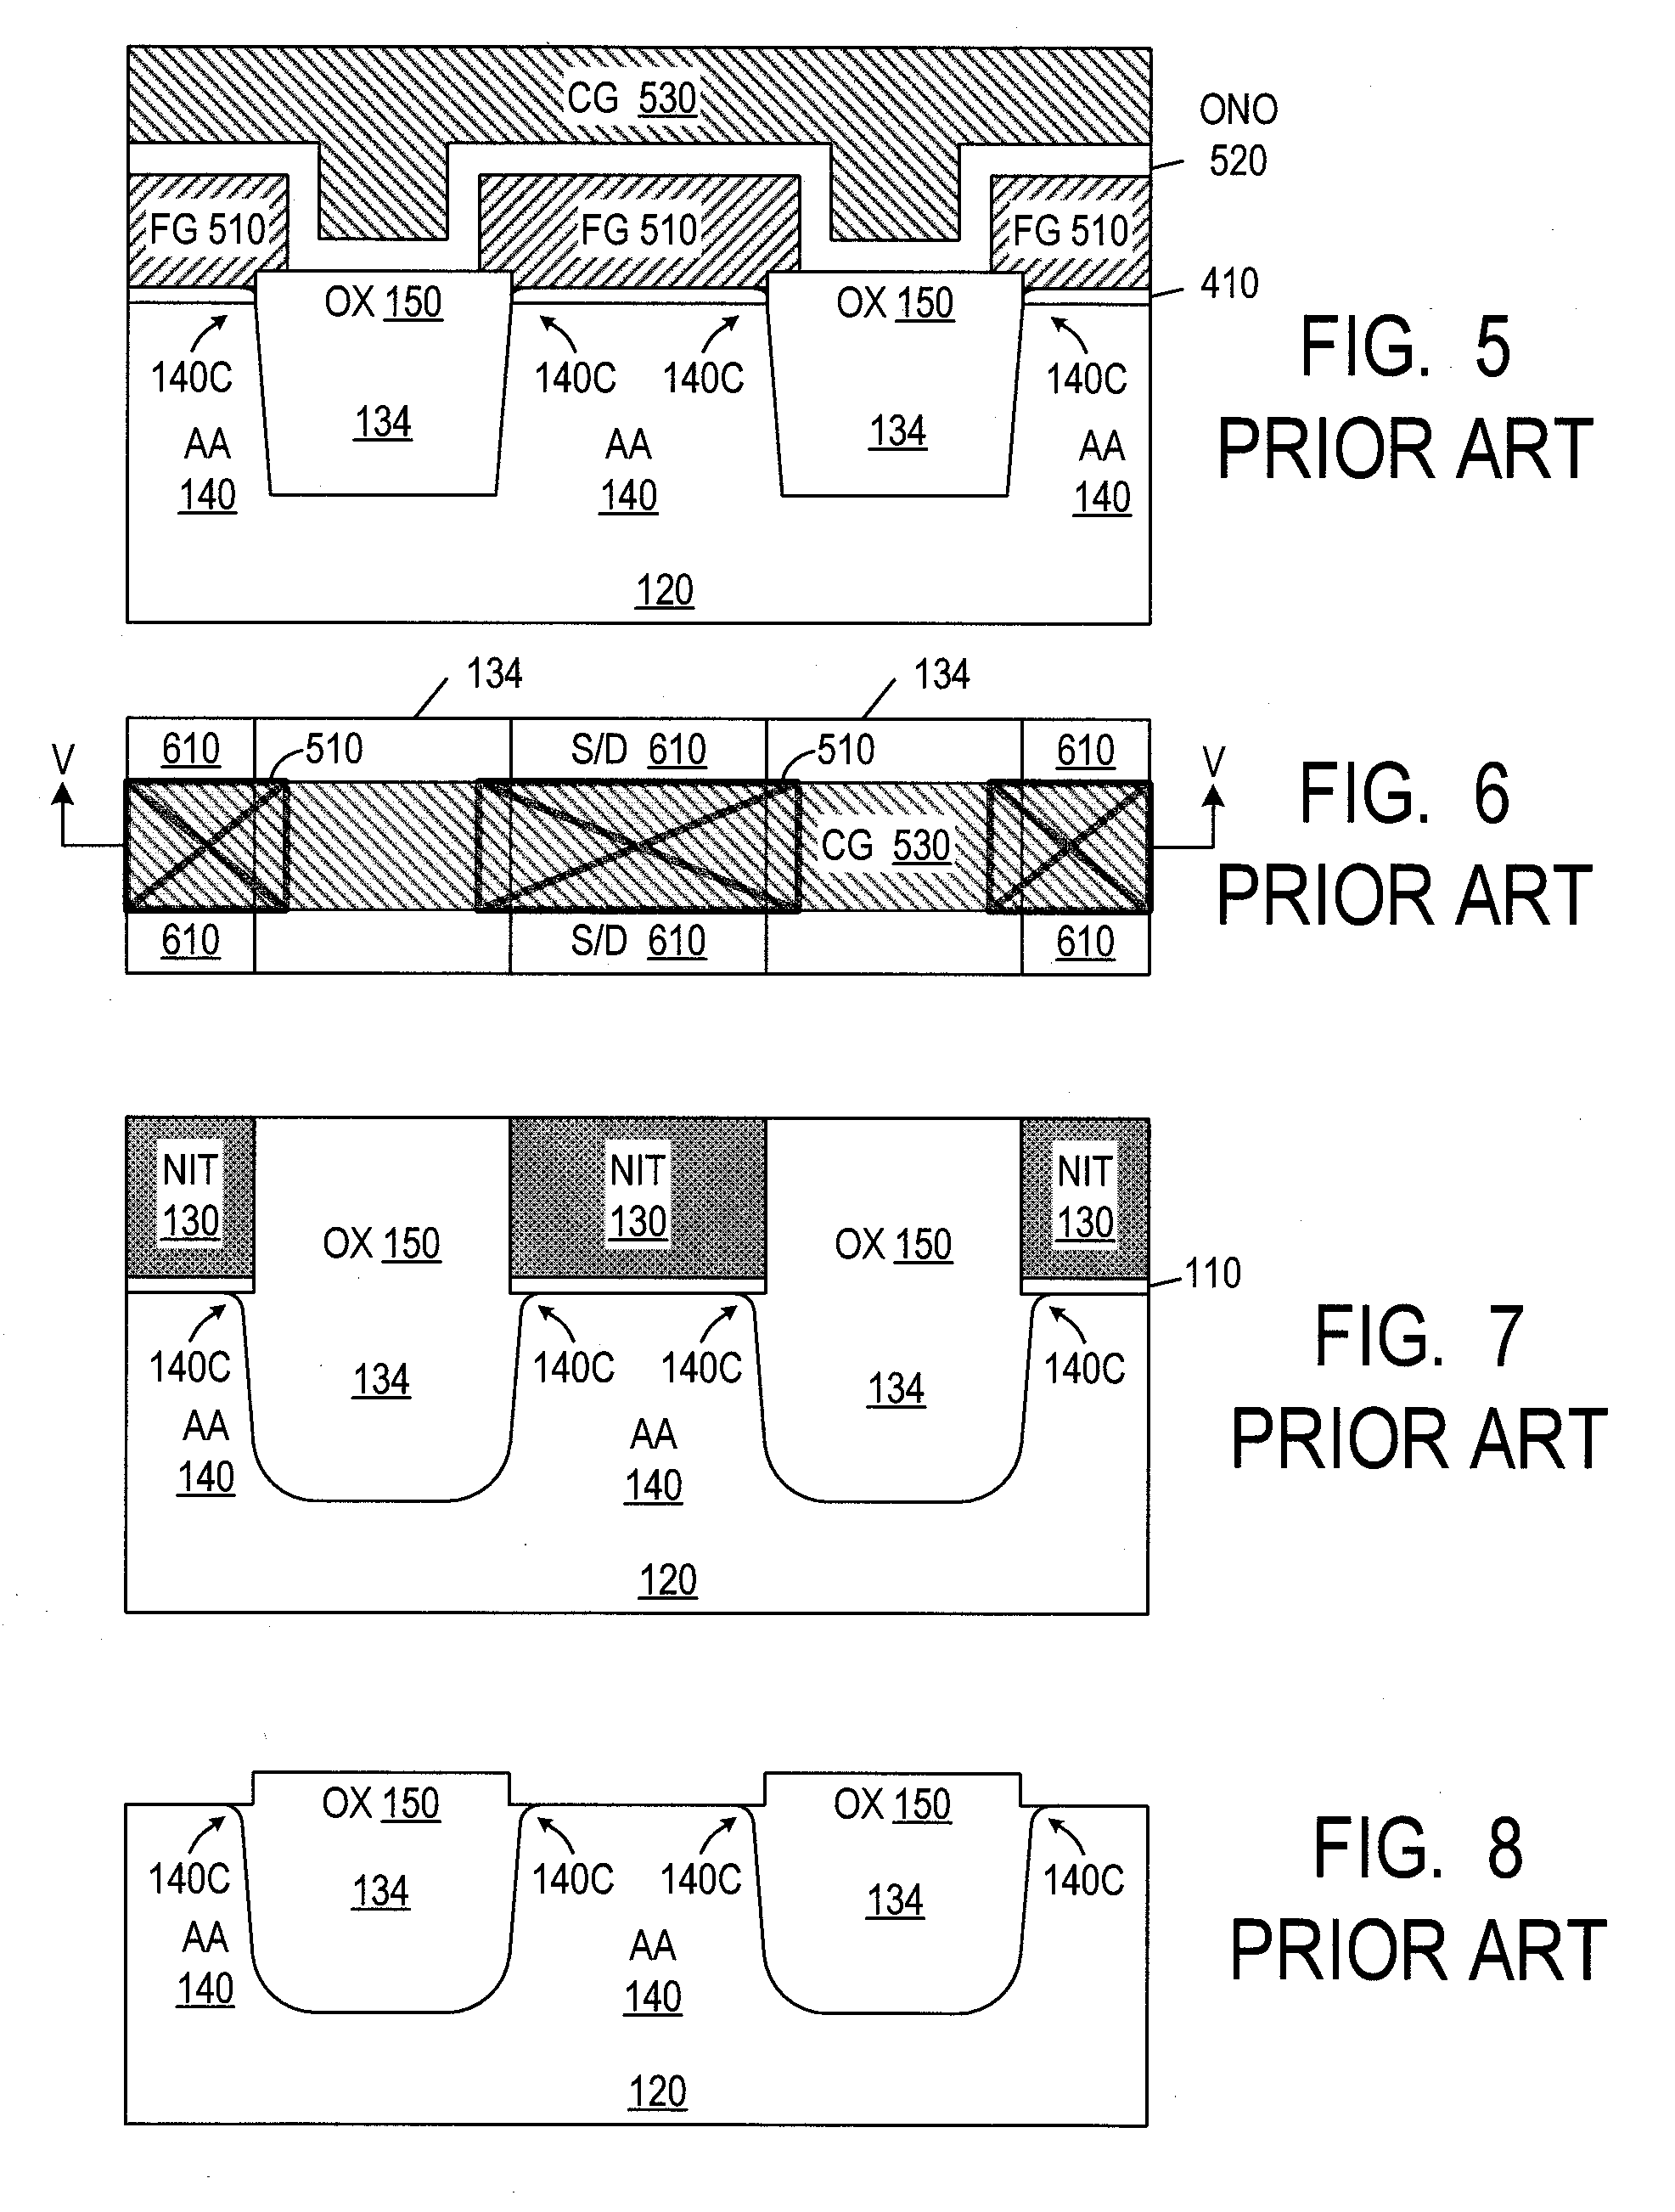 Use of chlorine to fabricate trench dielectric in integrated circuits